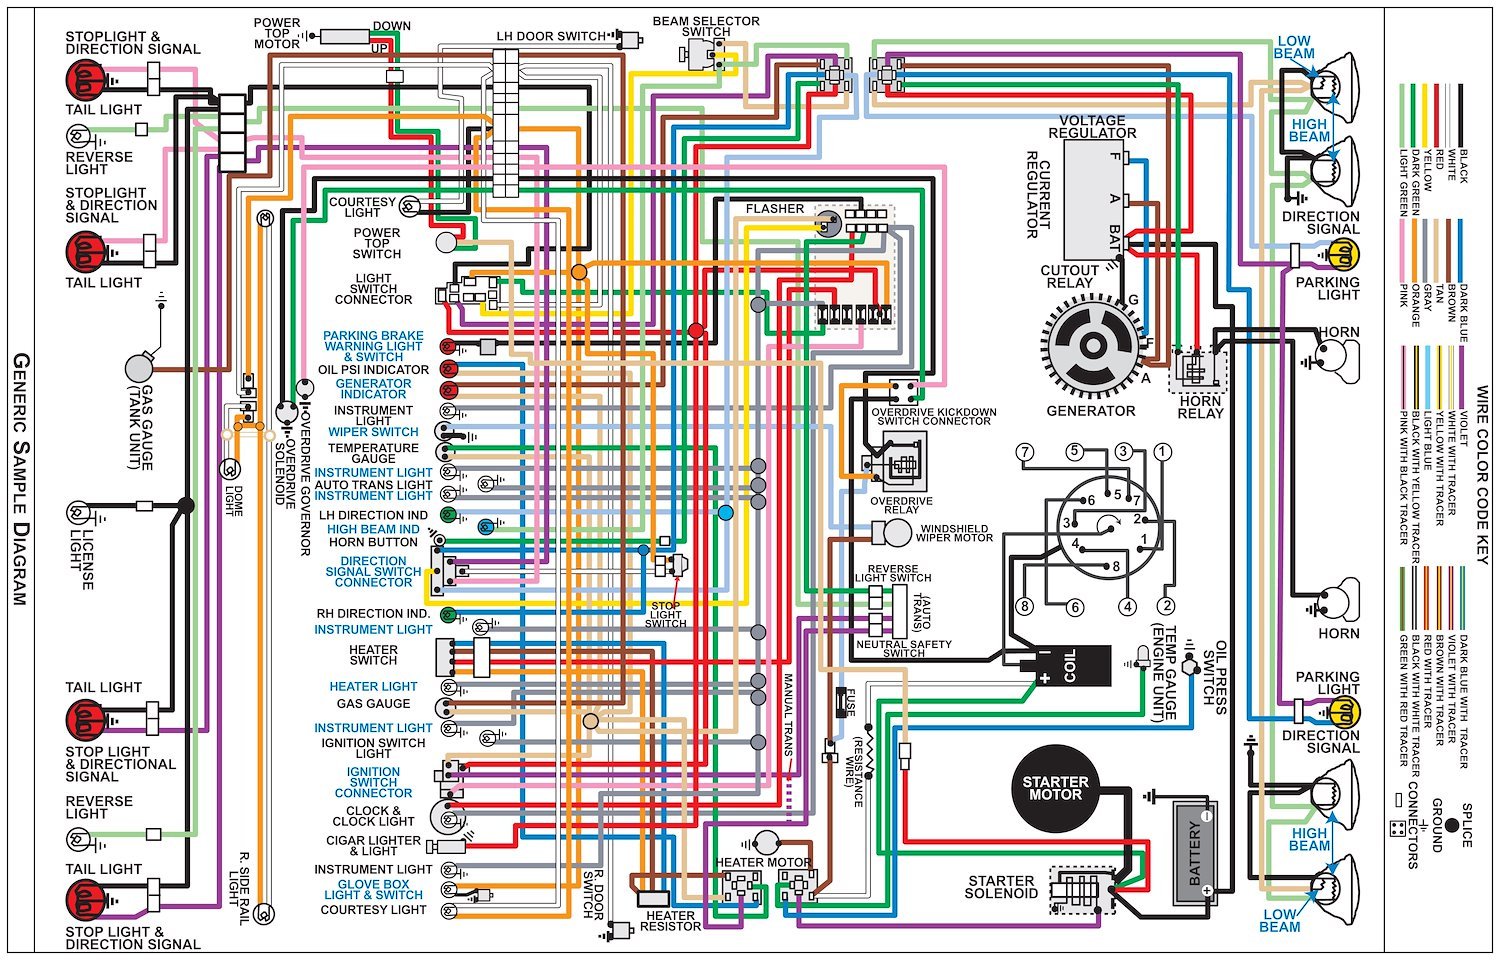 Wiring Diagram for 1970-1971 Chevy Camaro (All Models), 11 in. x 17 in., Laminated